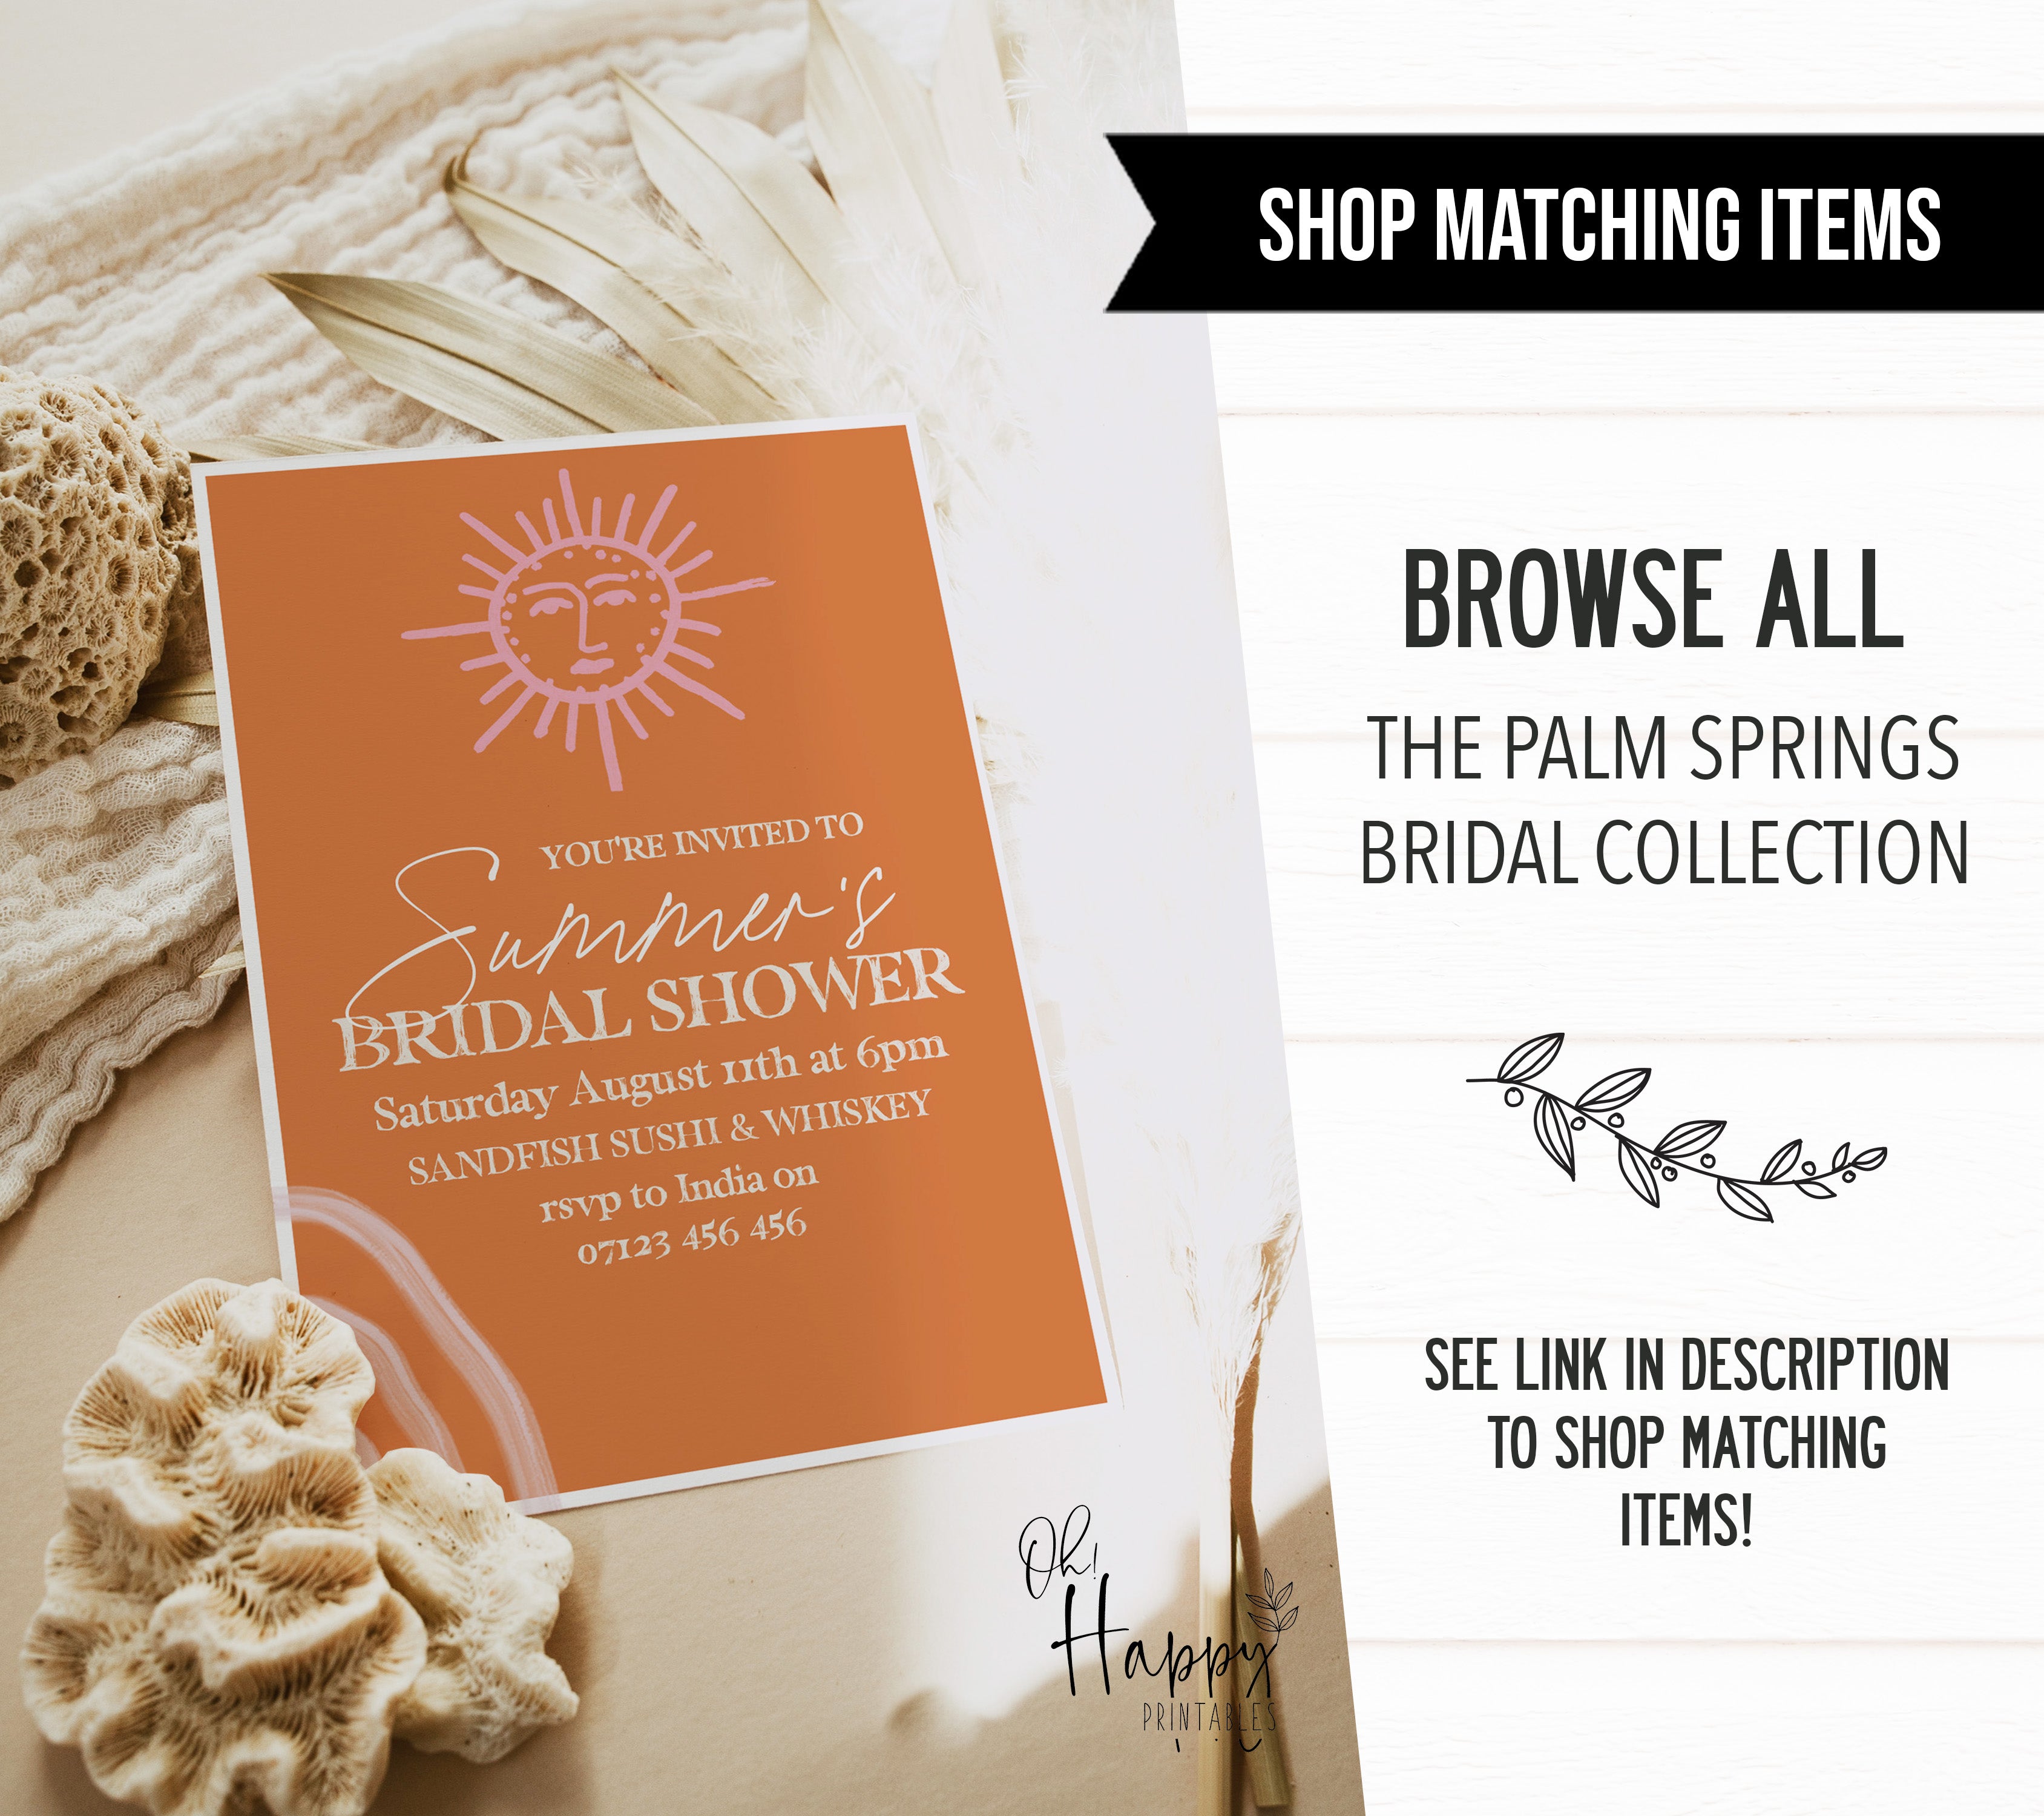 Fully editable and printable bridal shower love story mad libs game with a Palm Springs design. Perfect for a Palm Springs bridal shower themed party